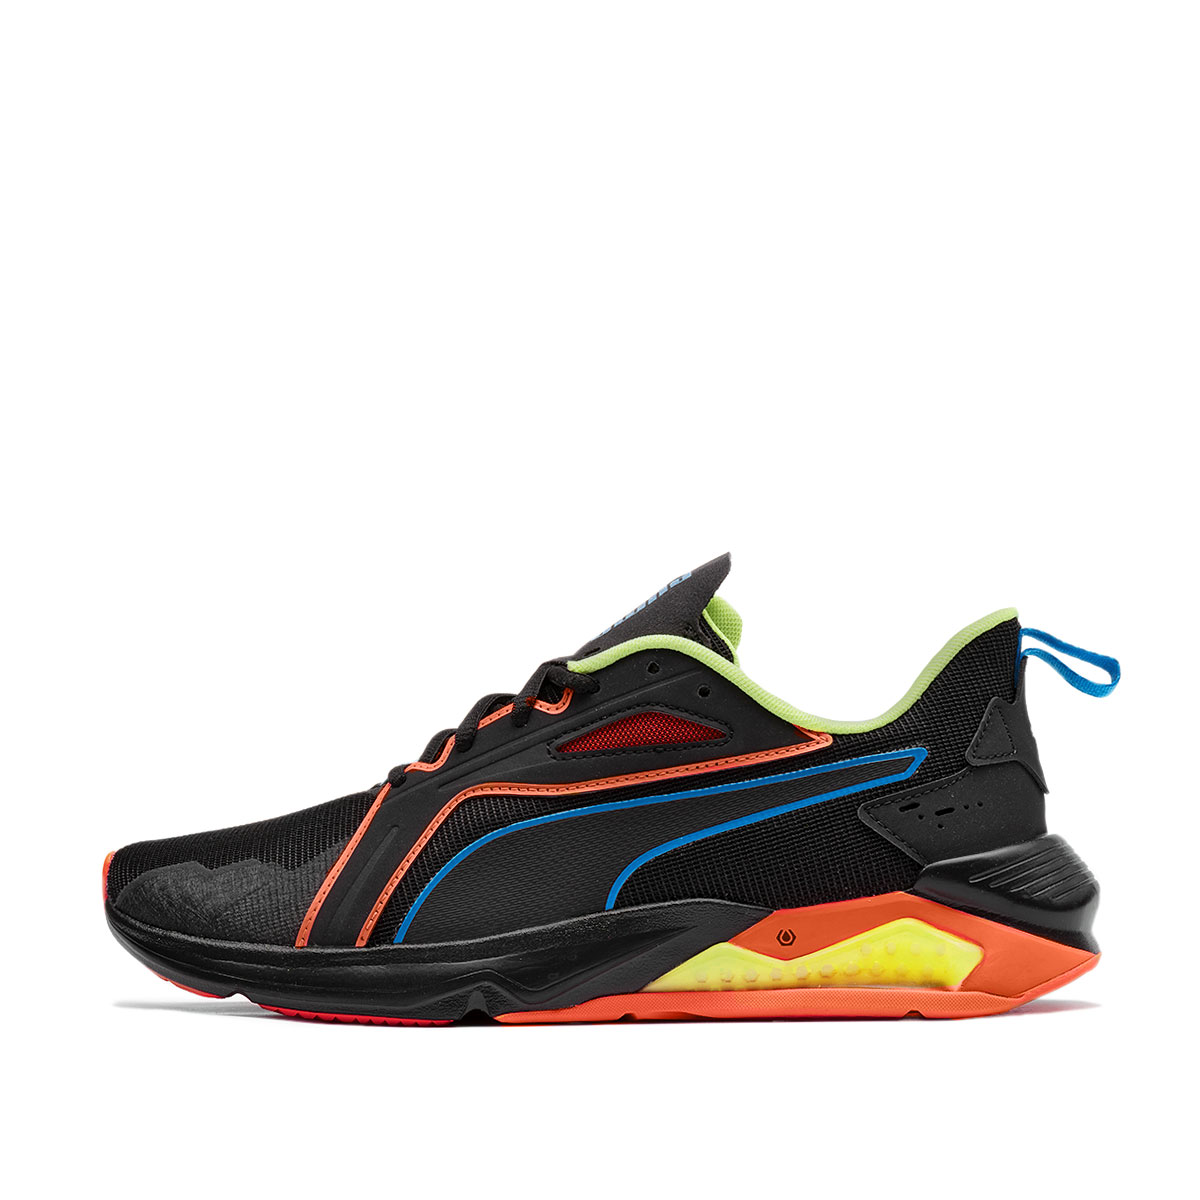 Puma LQDCELL Method First Mile Xtreme  193726-02